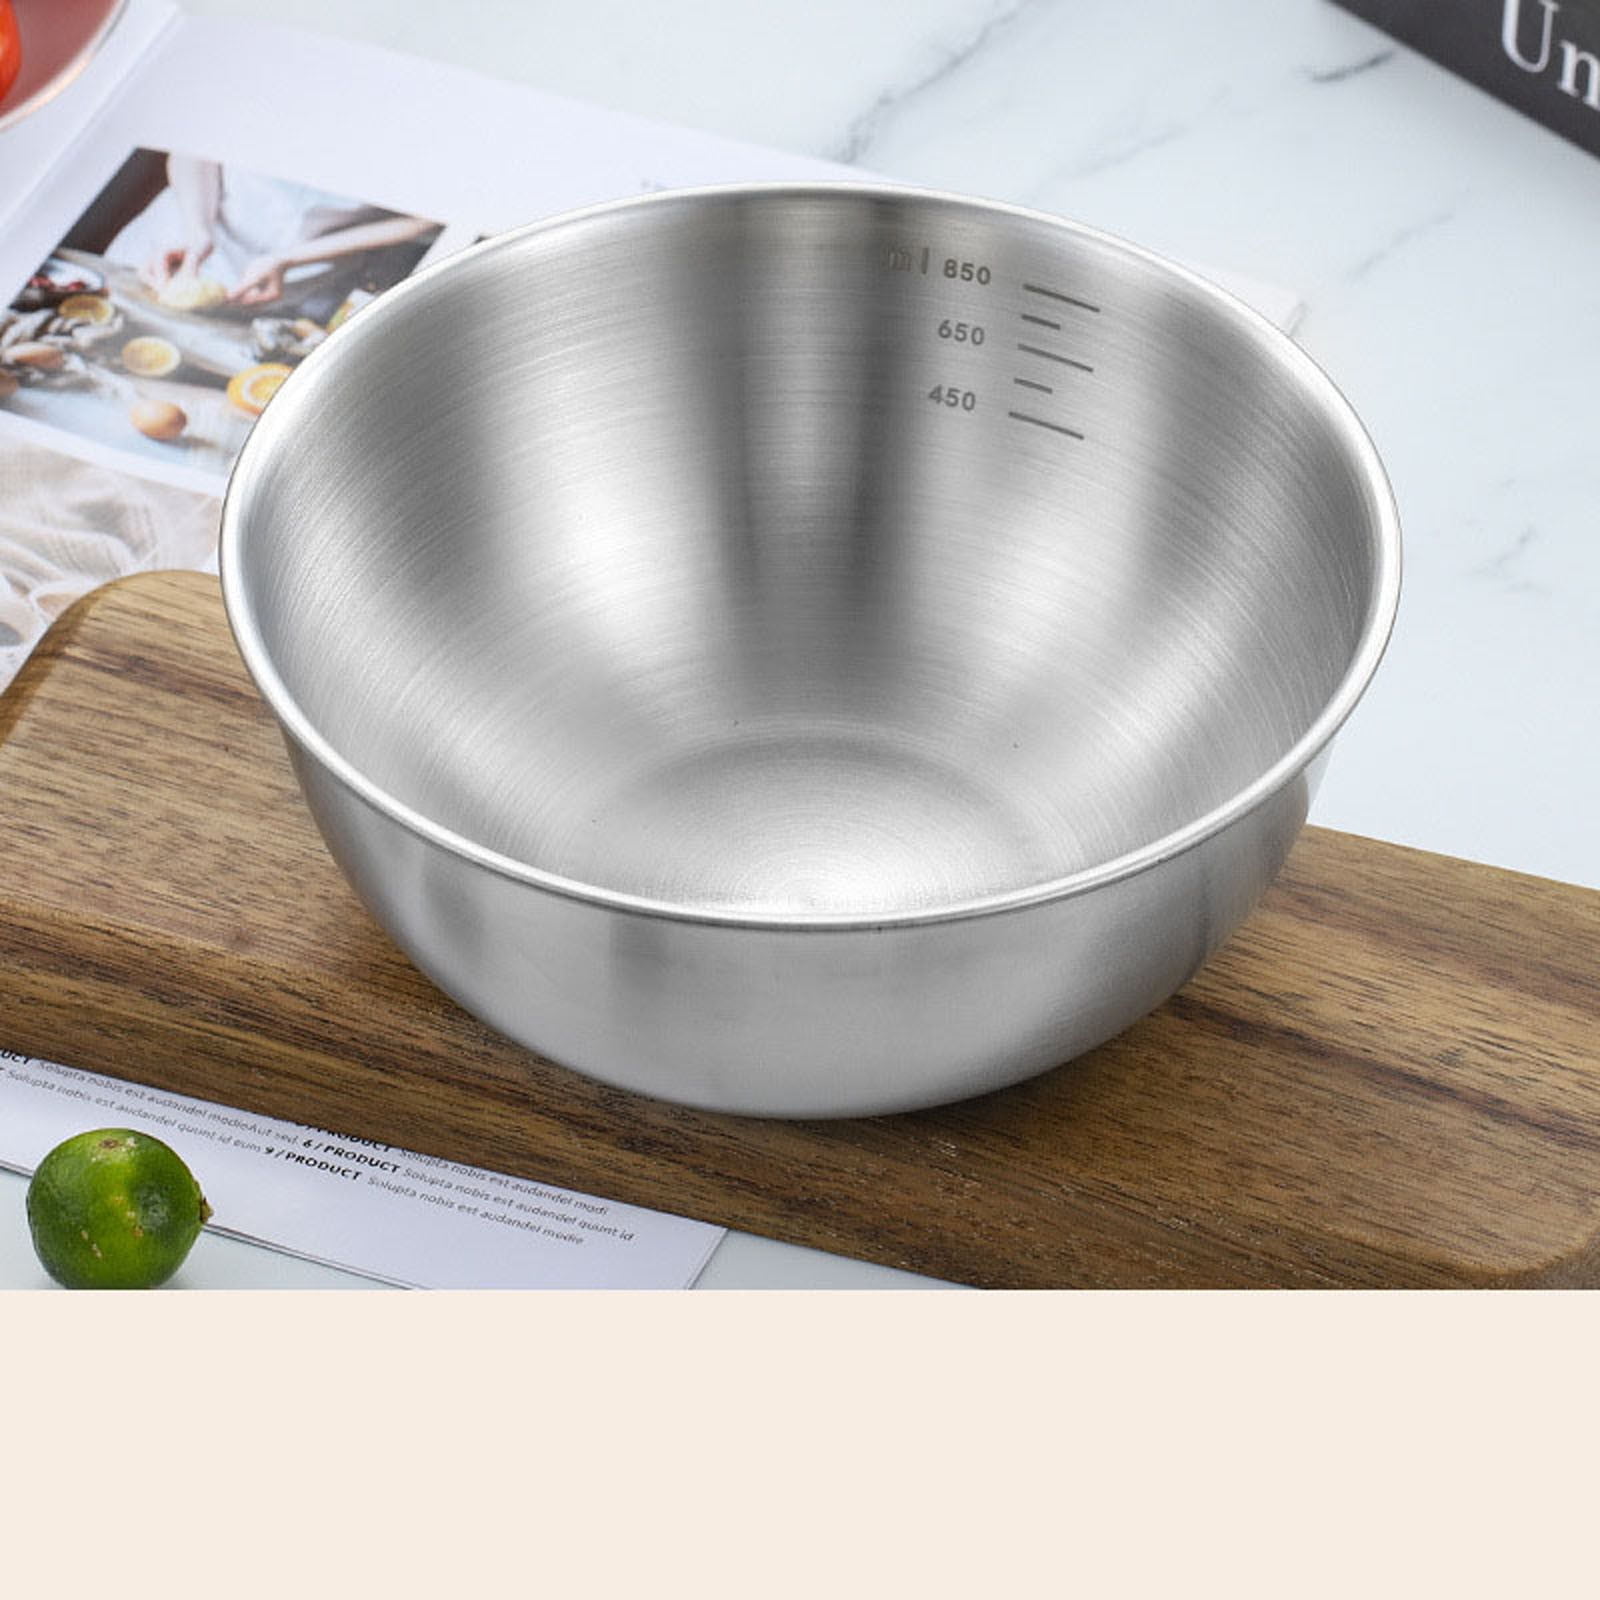  Tovolo Stainless Steel Deep Mixing, Easy Pour With Rounded Lip  Kitchen Metal Bowls for Baking & Marinating, Dishwasher-Safe, 3-1/2-Quart :  Everything Else